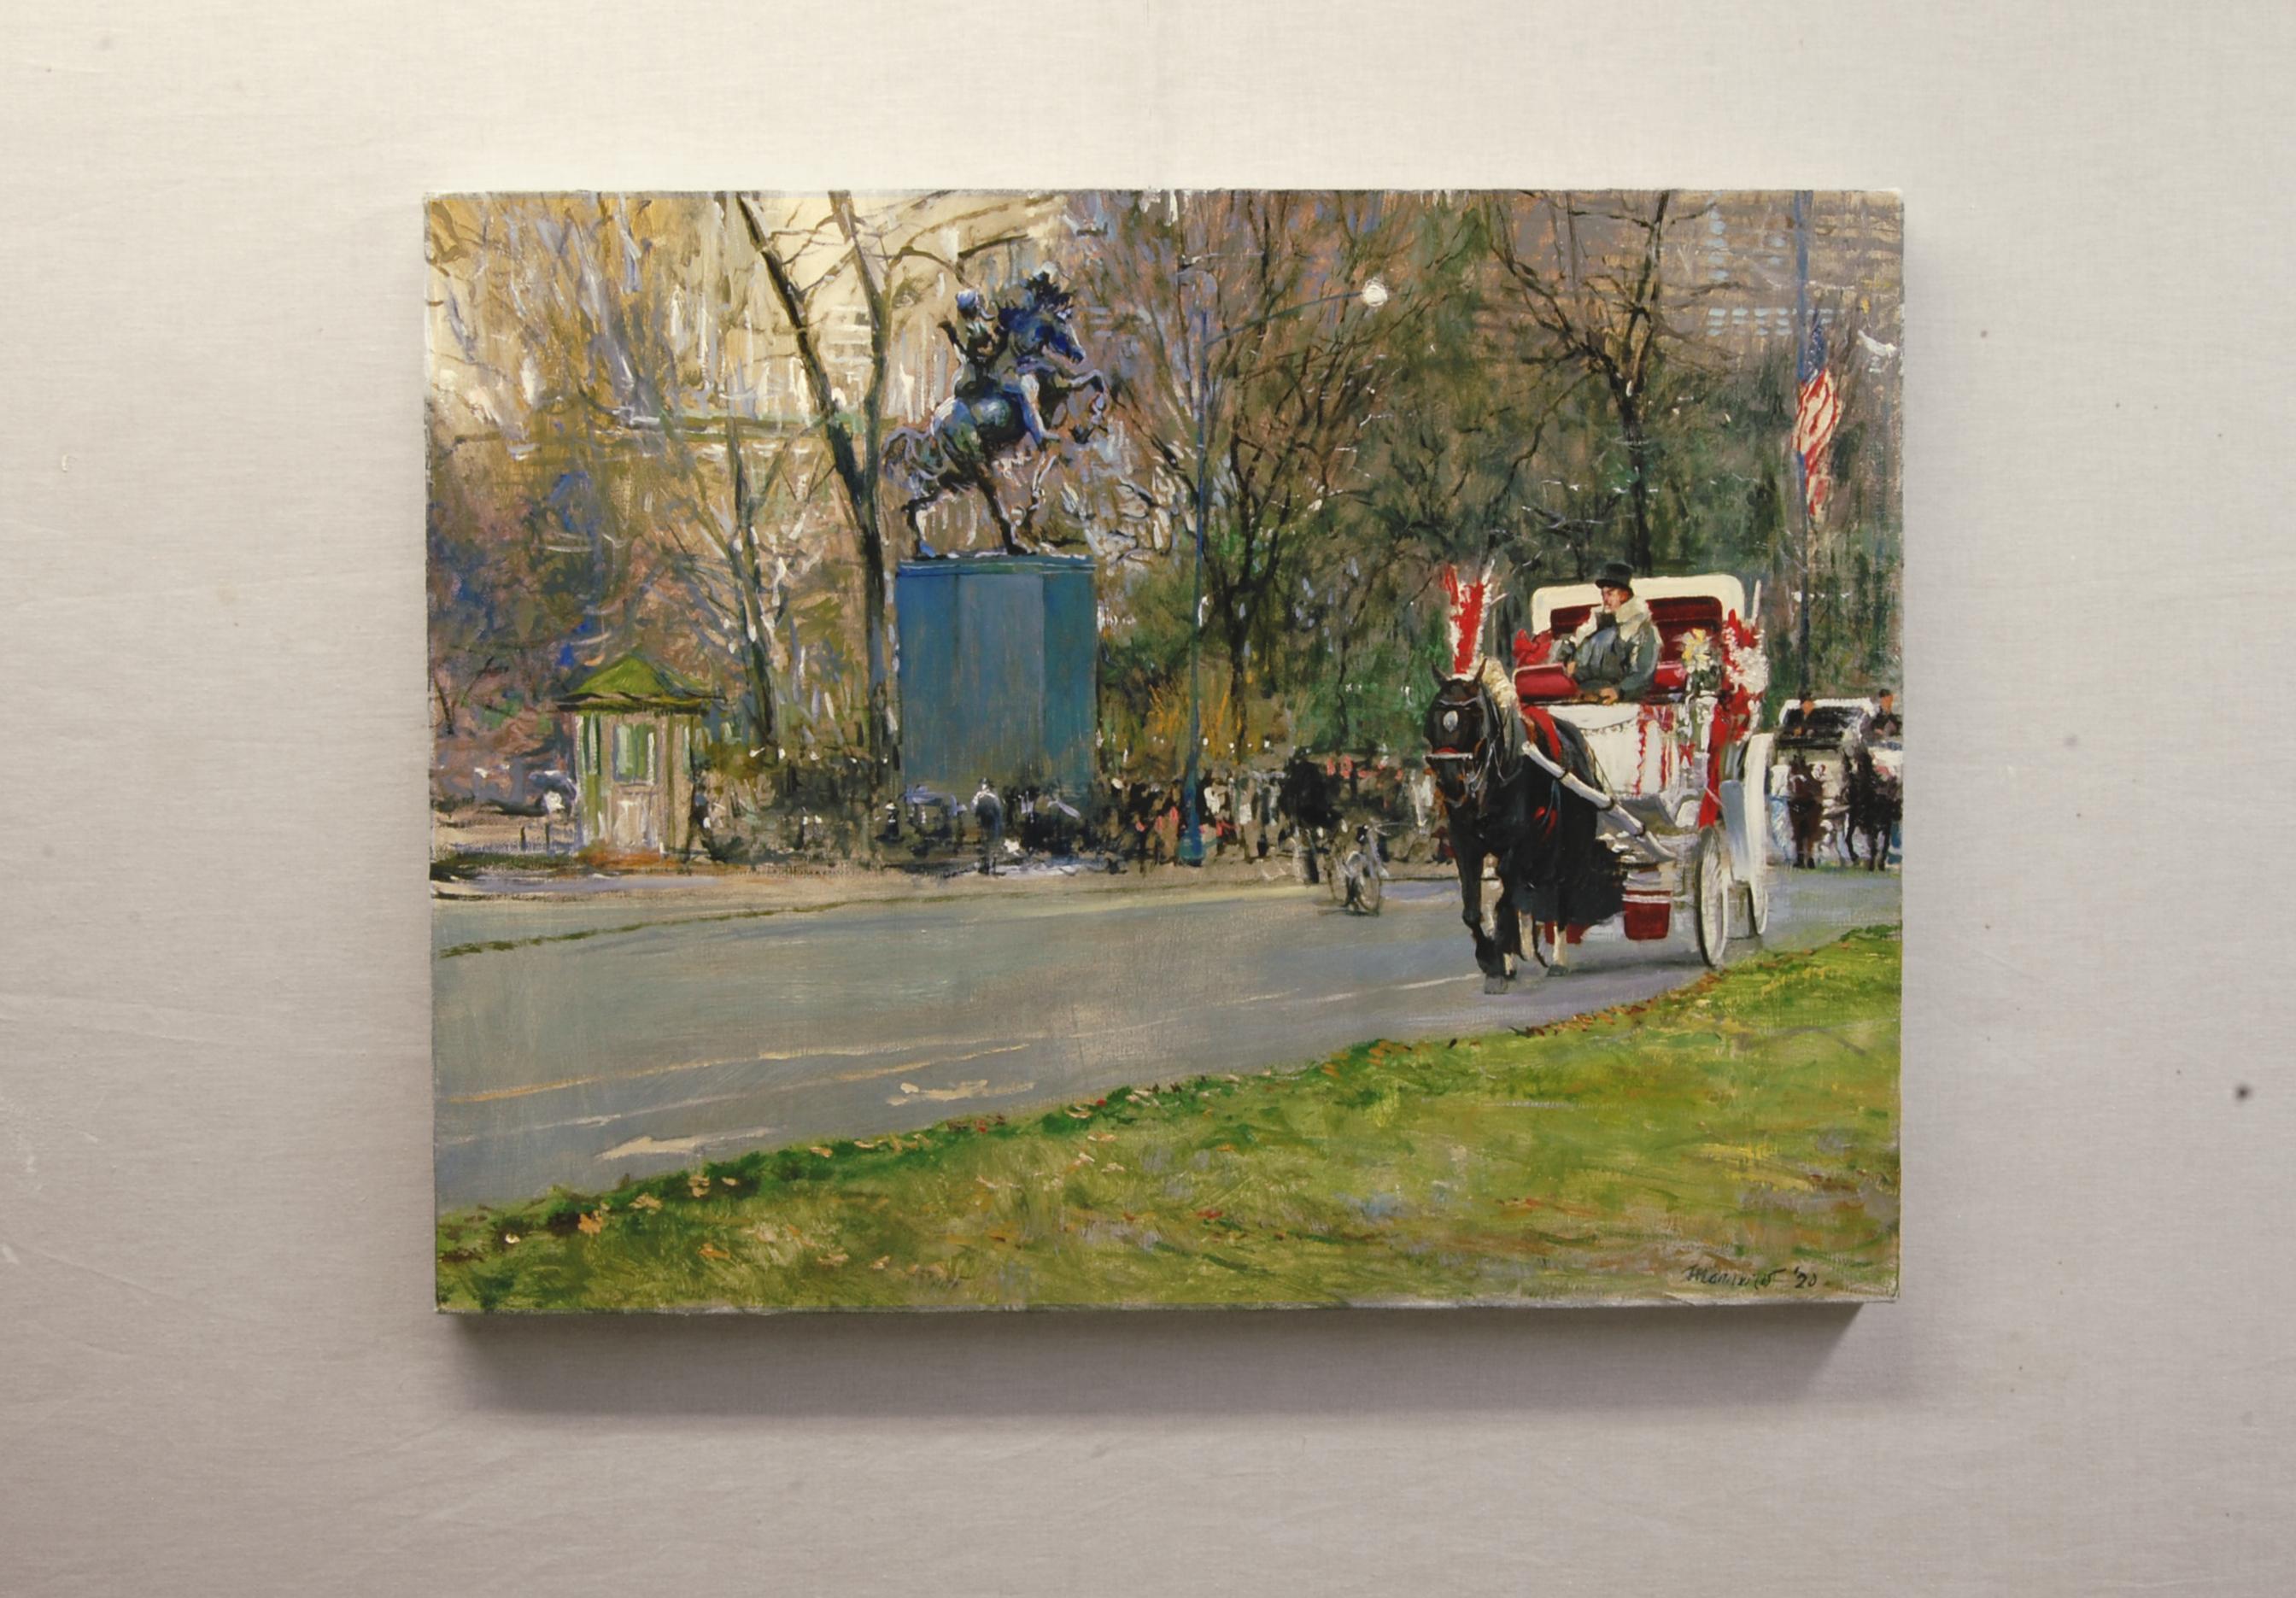 <p>Artist Comments<br>This scene depicts the south side of Manhattan's Central Park. People can hire hansom cabs along 59th Street. The rides begin along this street and the carriages meander through parts of southern Central Park. To the left, one